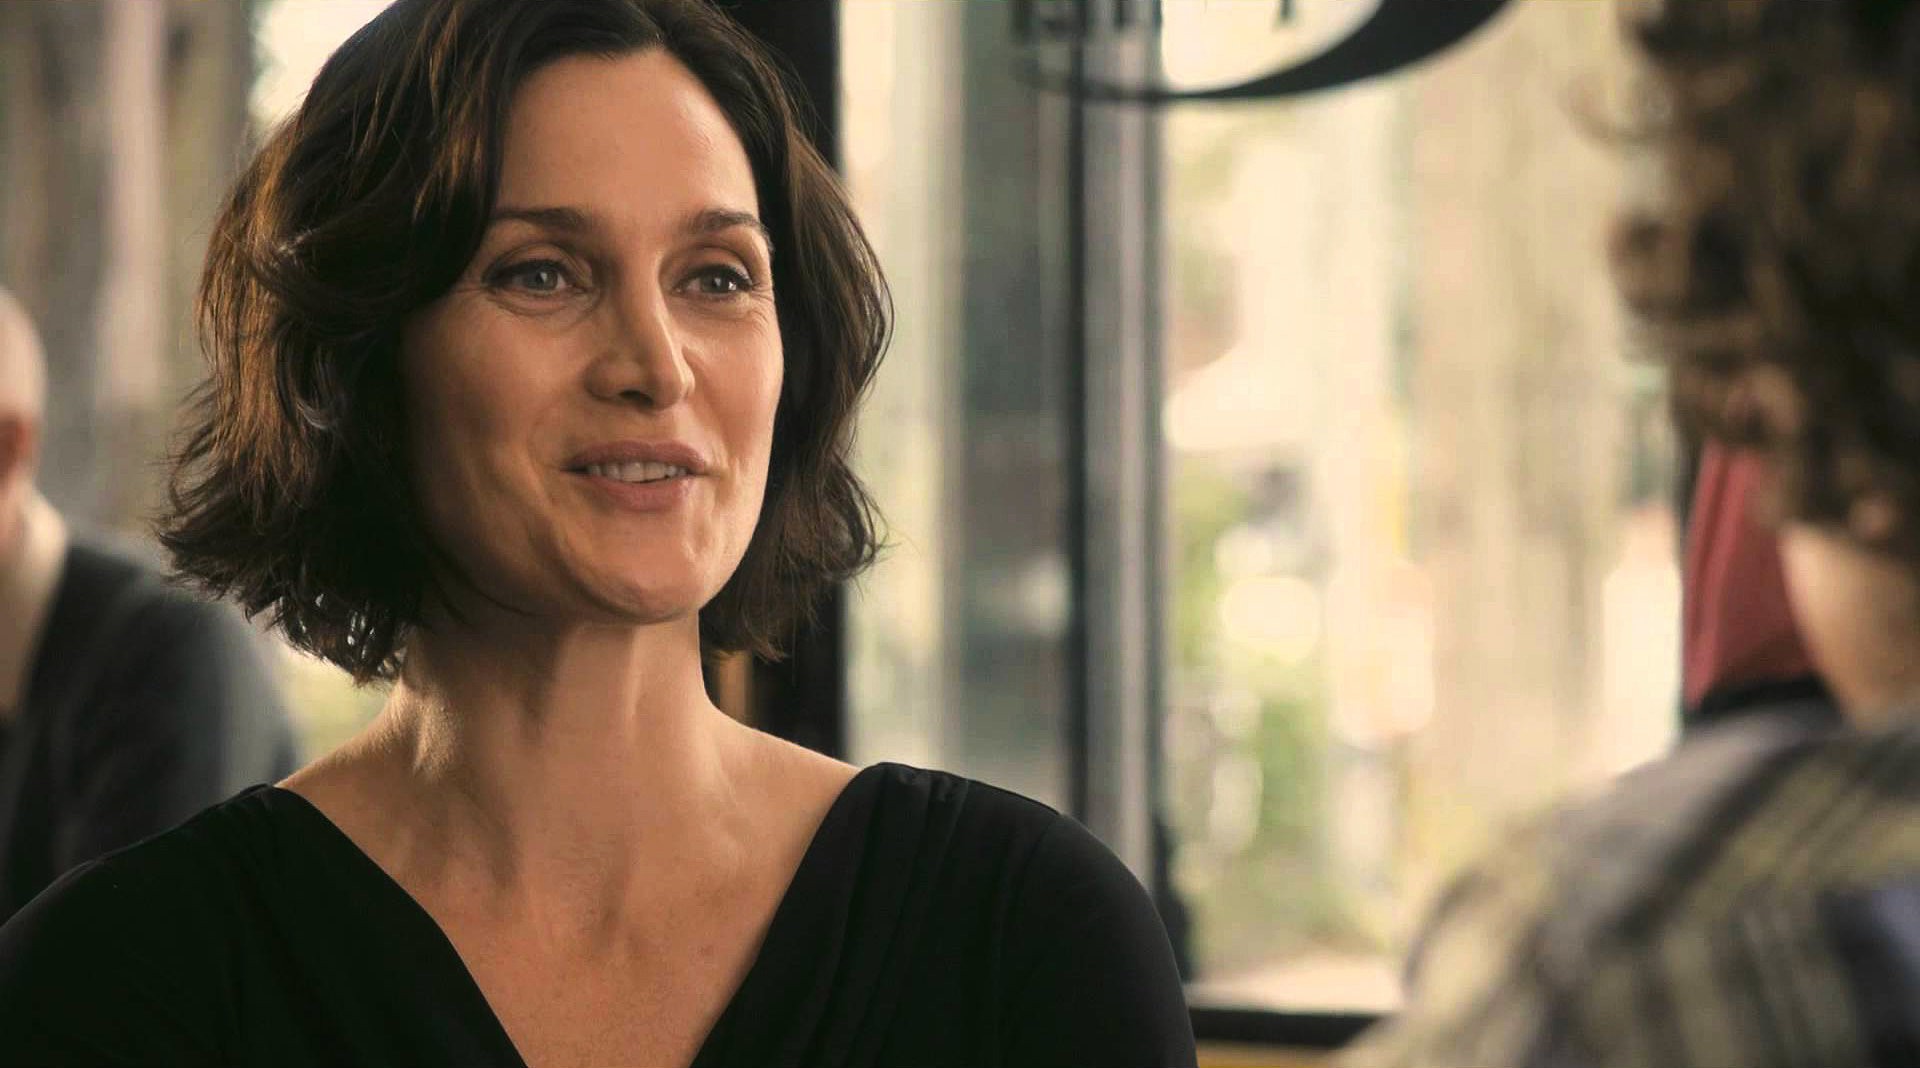 Carrie-Anne Moss stars as Catherine in The Orchard's Treading Water (2015)